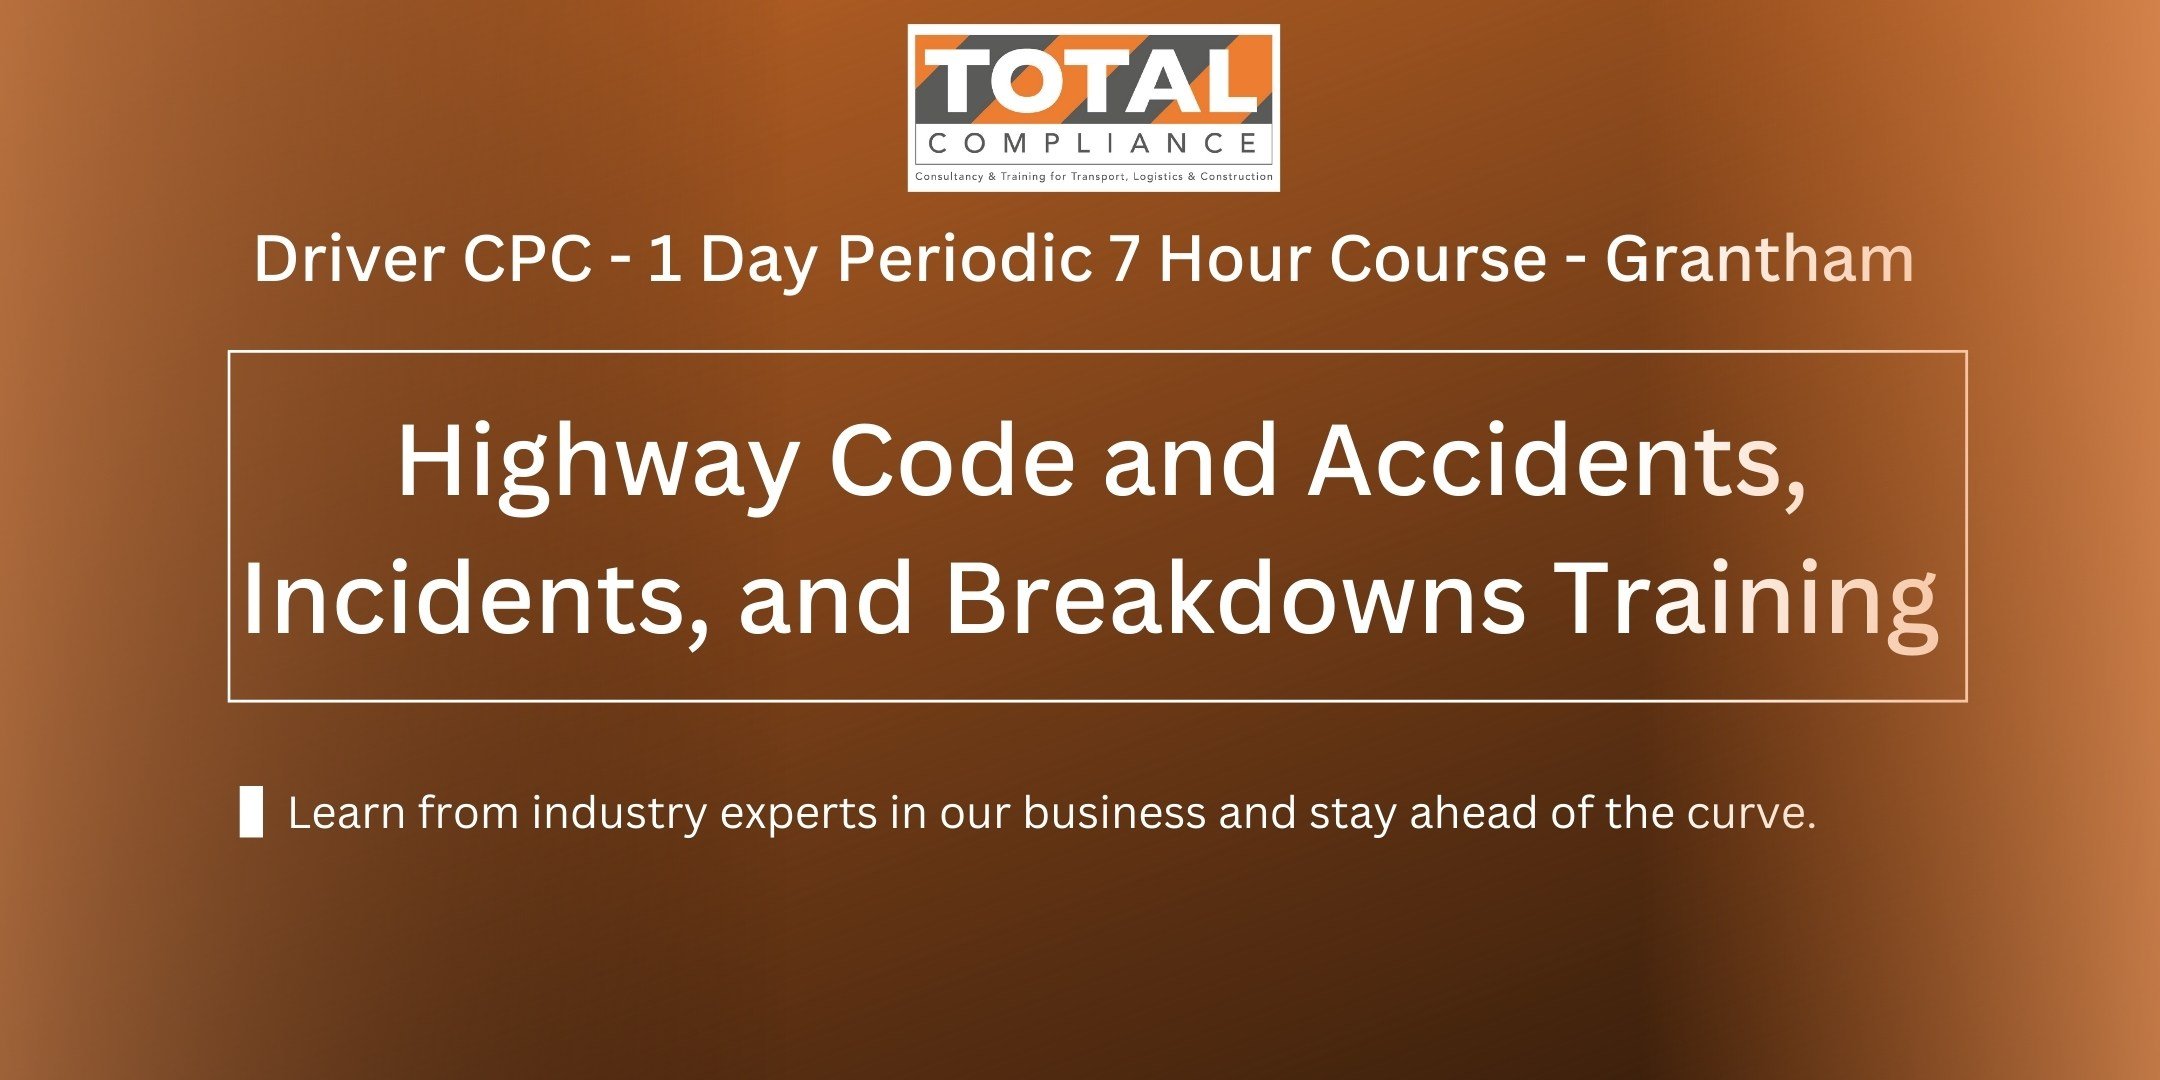 Driver CPC - 1 Day Periodic 7 Hour Course/ Highway Code, Accidents, Incidents, and Breakdowns Training  - Grantham